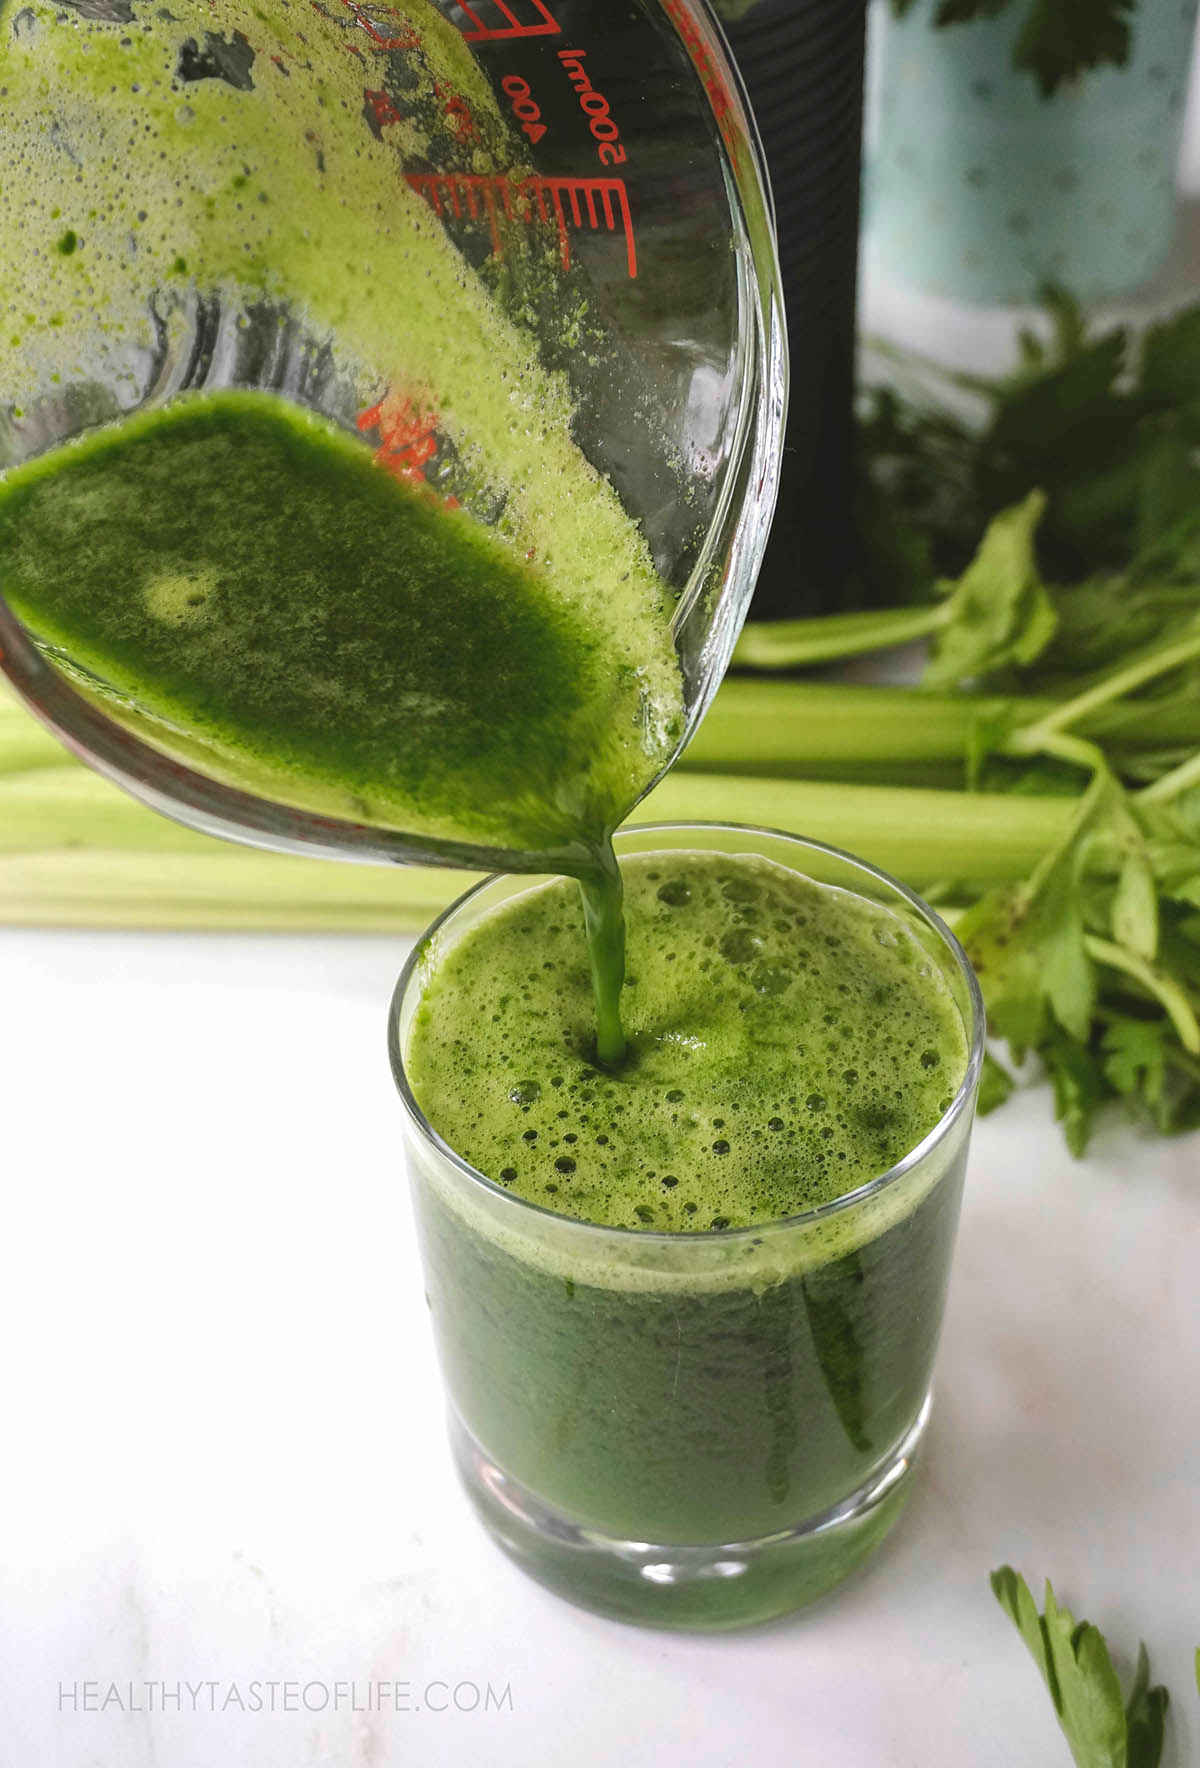 Pouring fresh green juice into a glass.